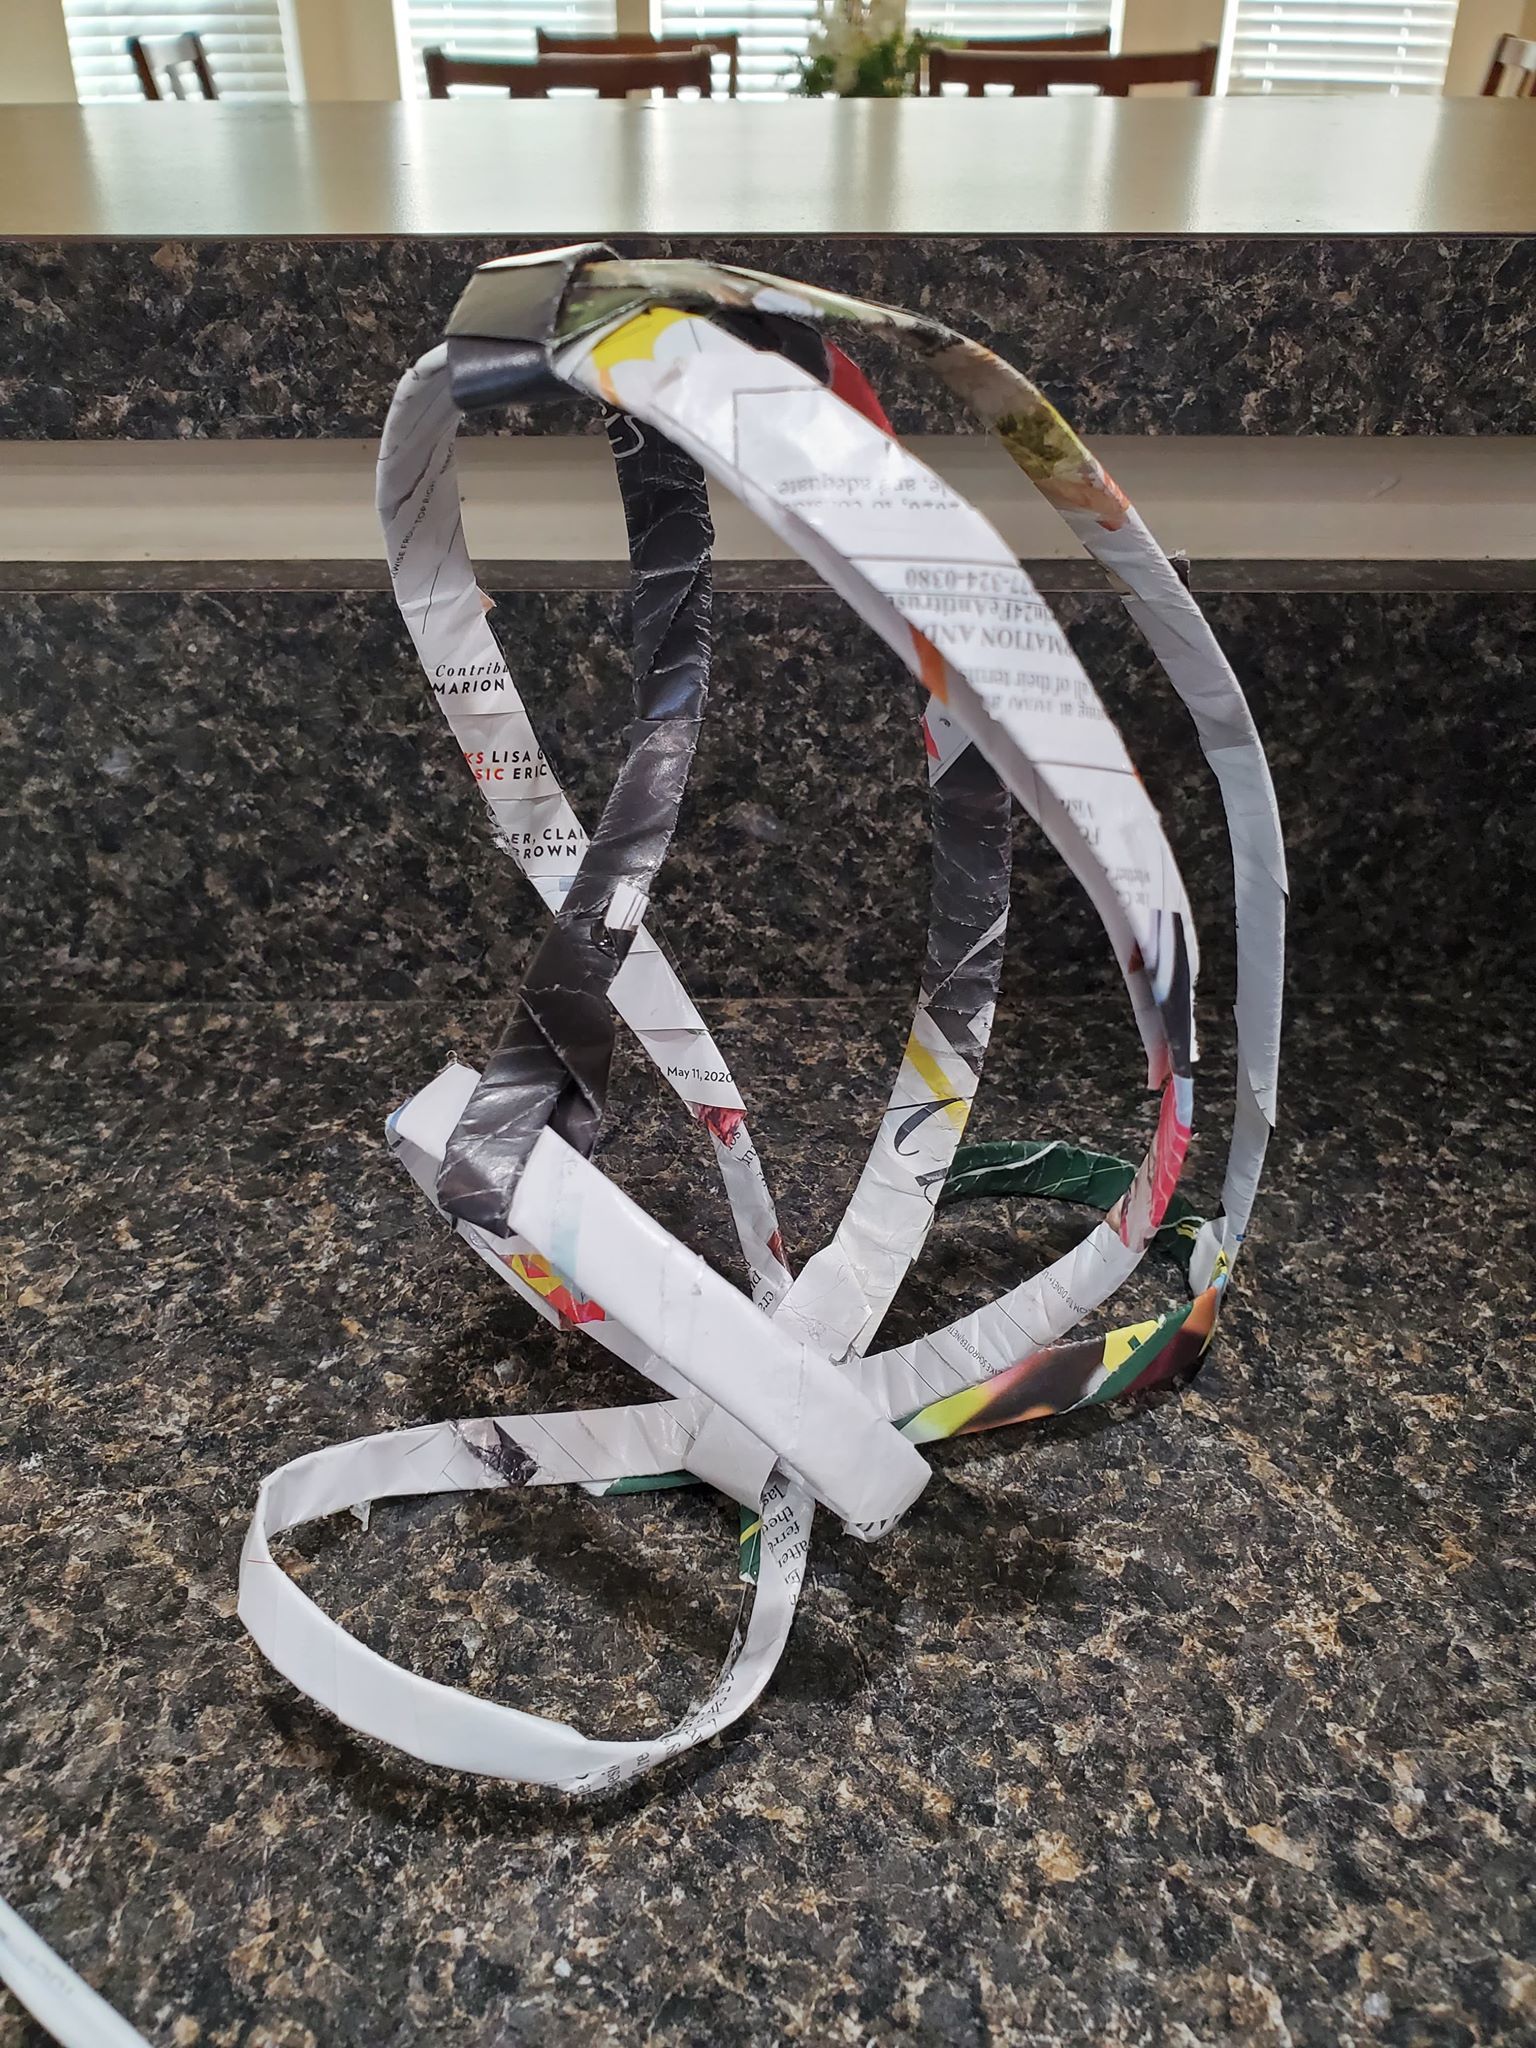 An abstract mixed media sculpture in progress, also featuring large overlapping coils, but with less finished detail than the image above